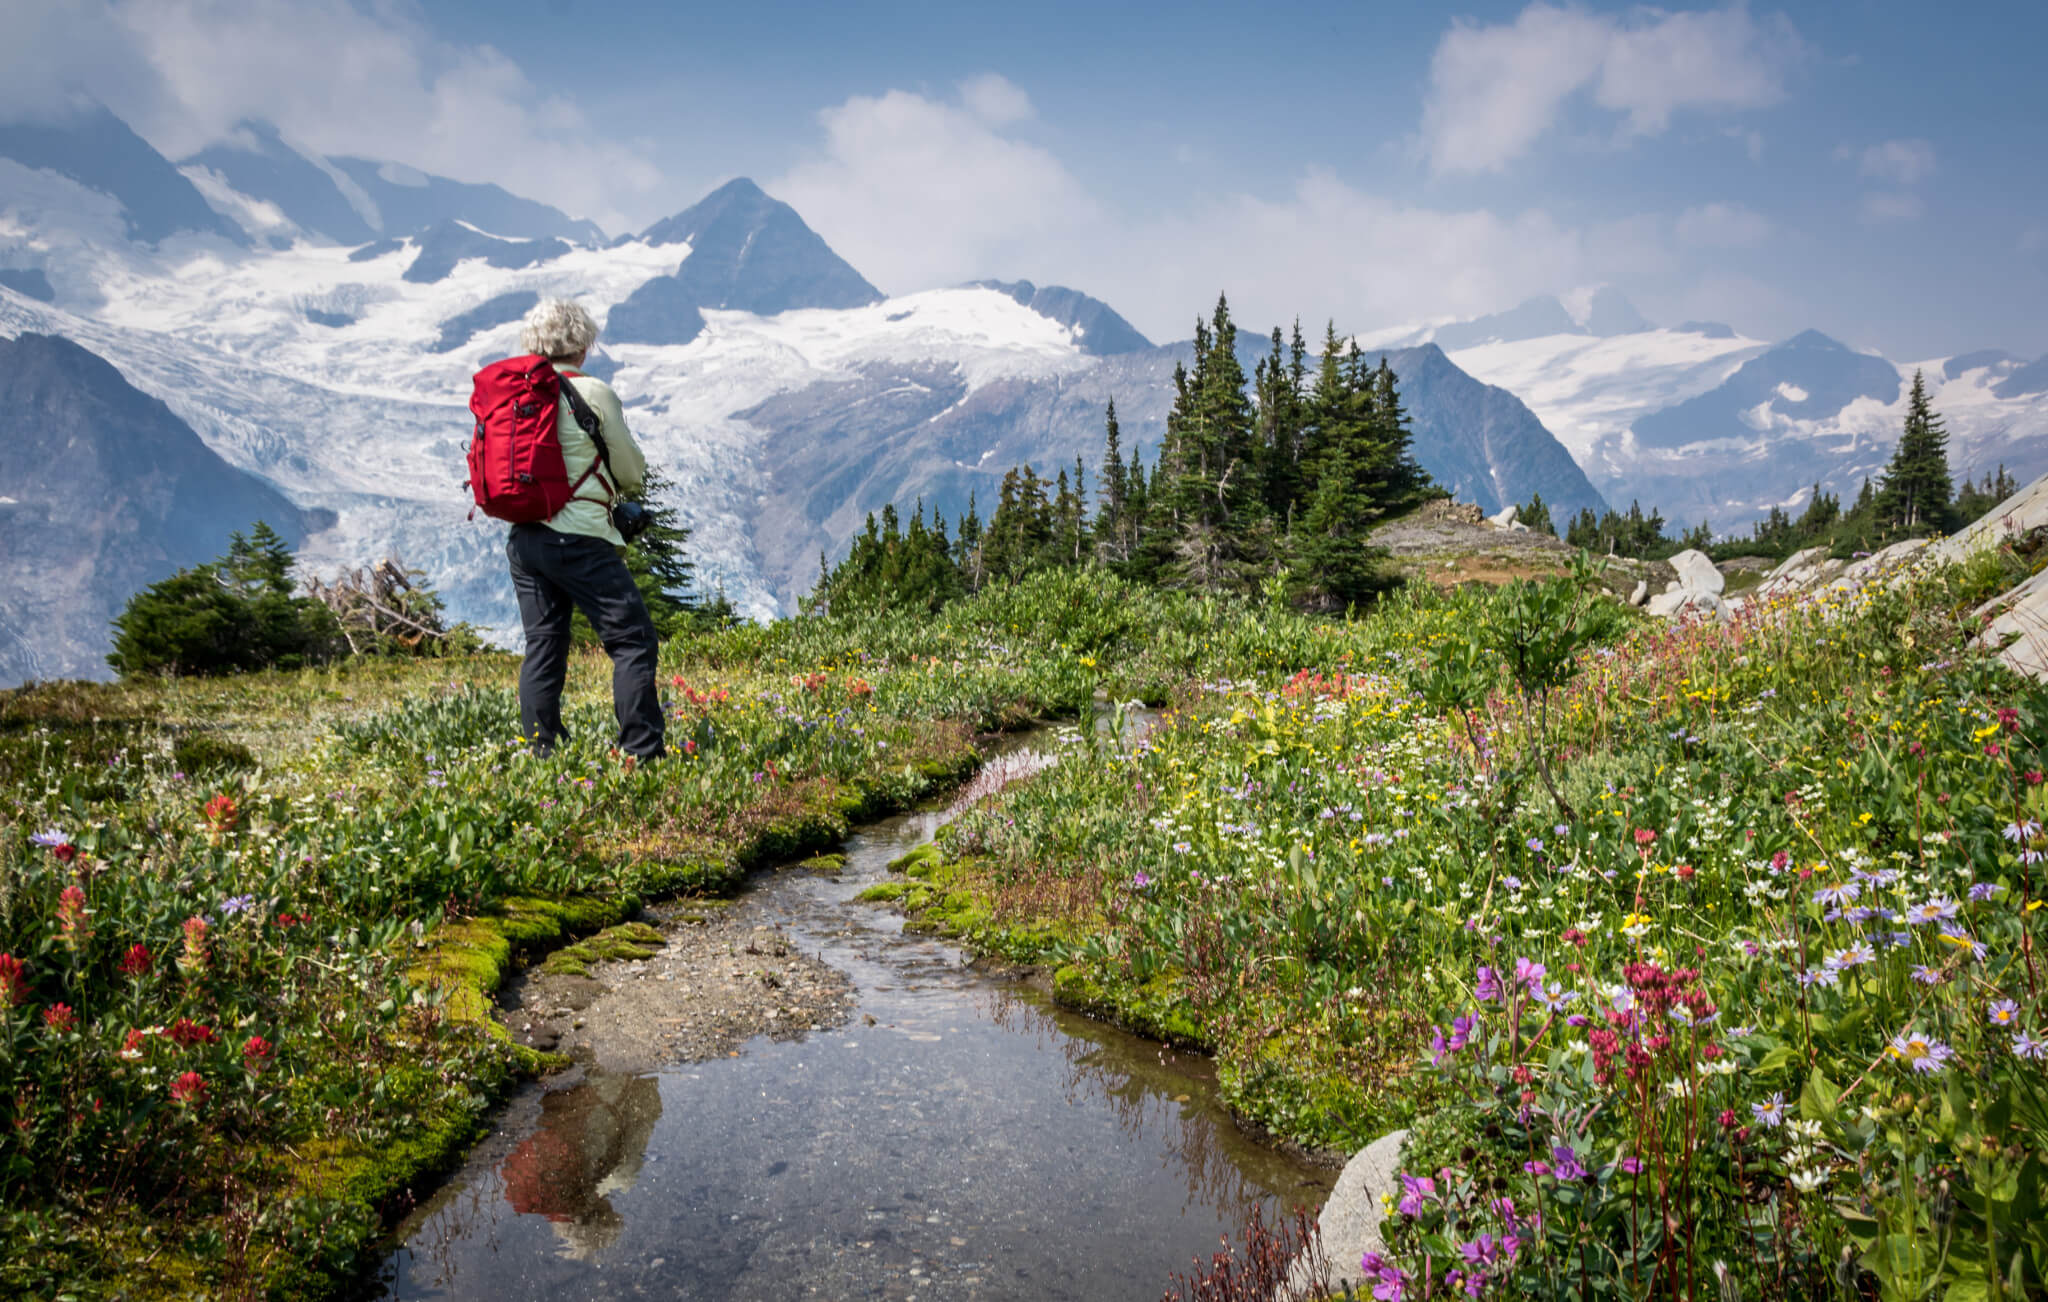 Man hiking in a flower-filled field n the Canadian Rockies